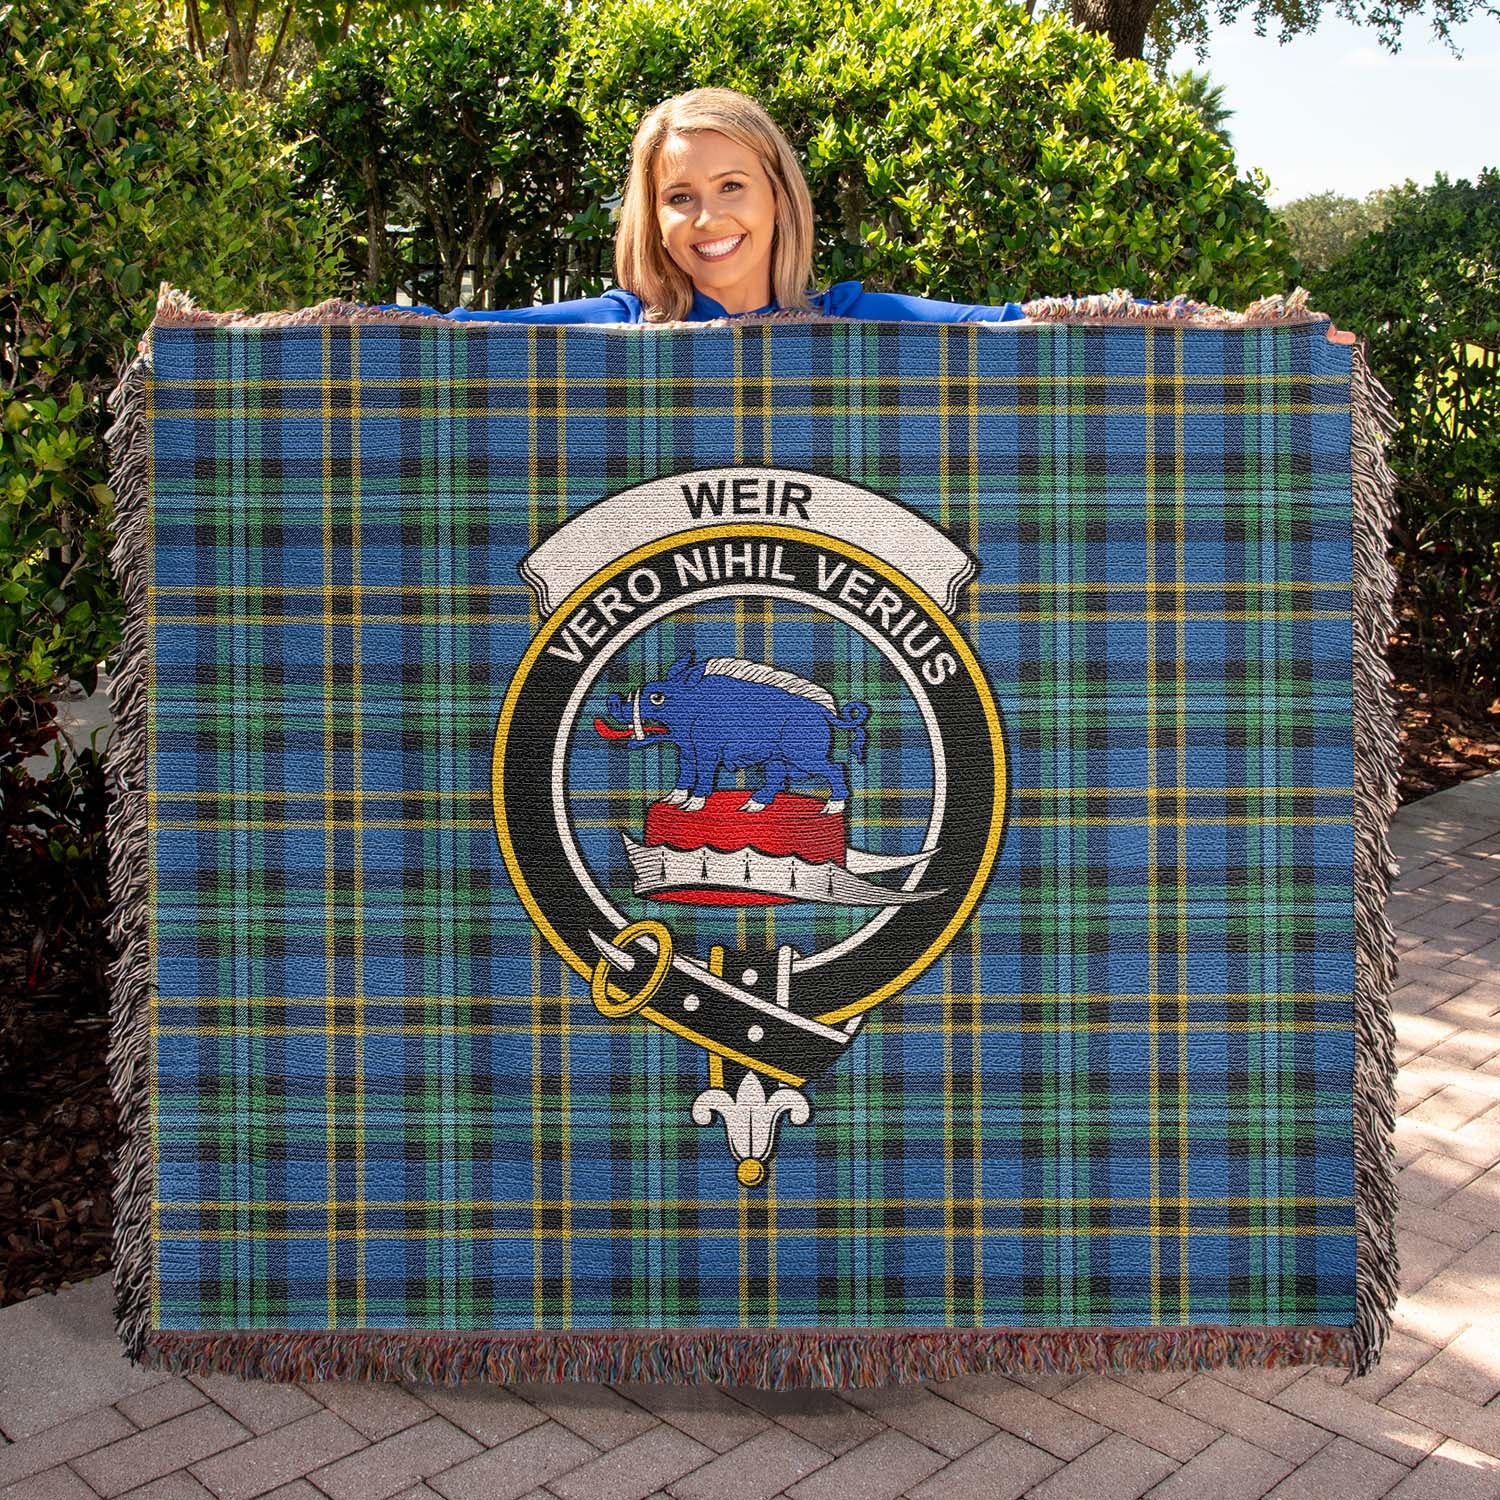 Tartan Vibes Clothing Weir Ancient Tartan Woven Blanket with Family Crest